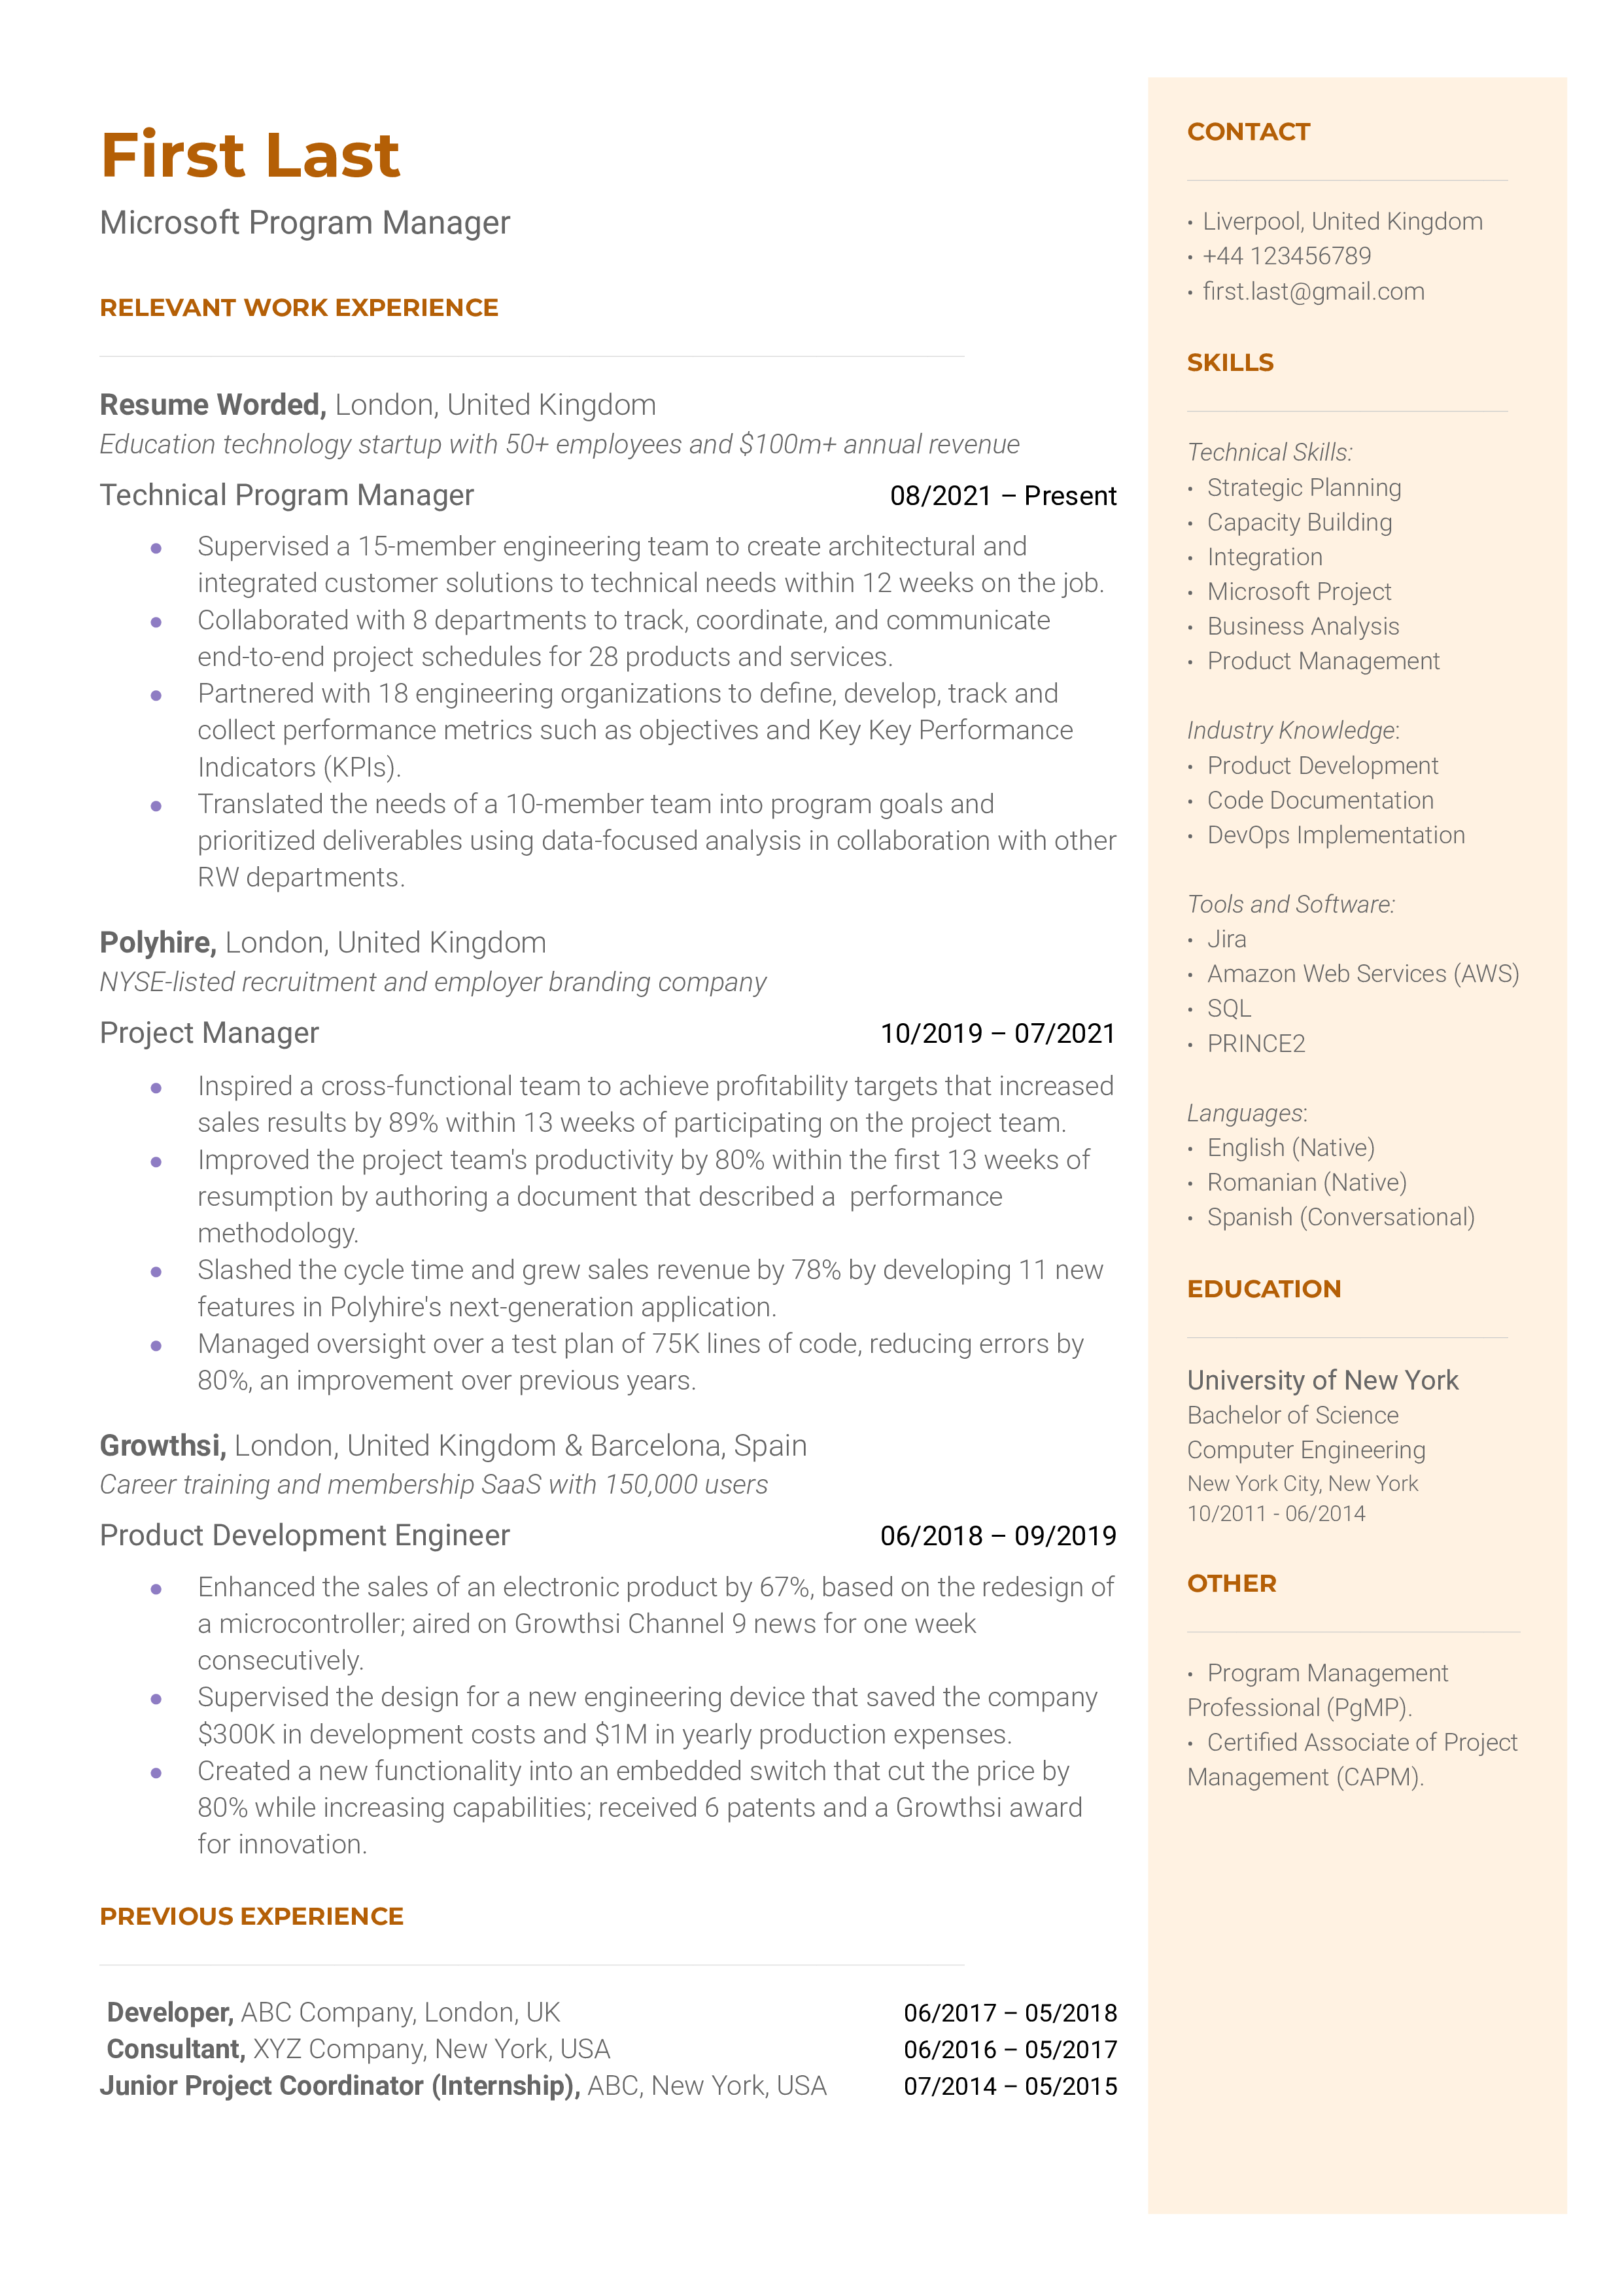 Microsoft program manager resume sample highlighting the applicant’s Microsoft-specific tools list and experience.